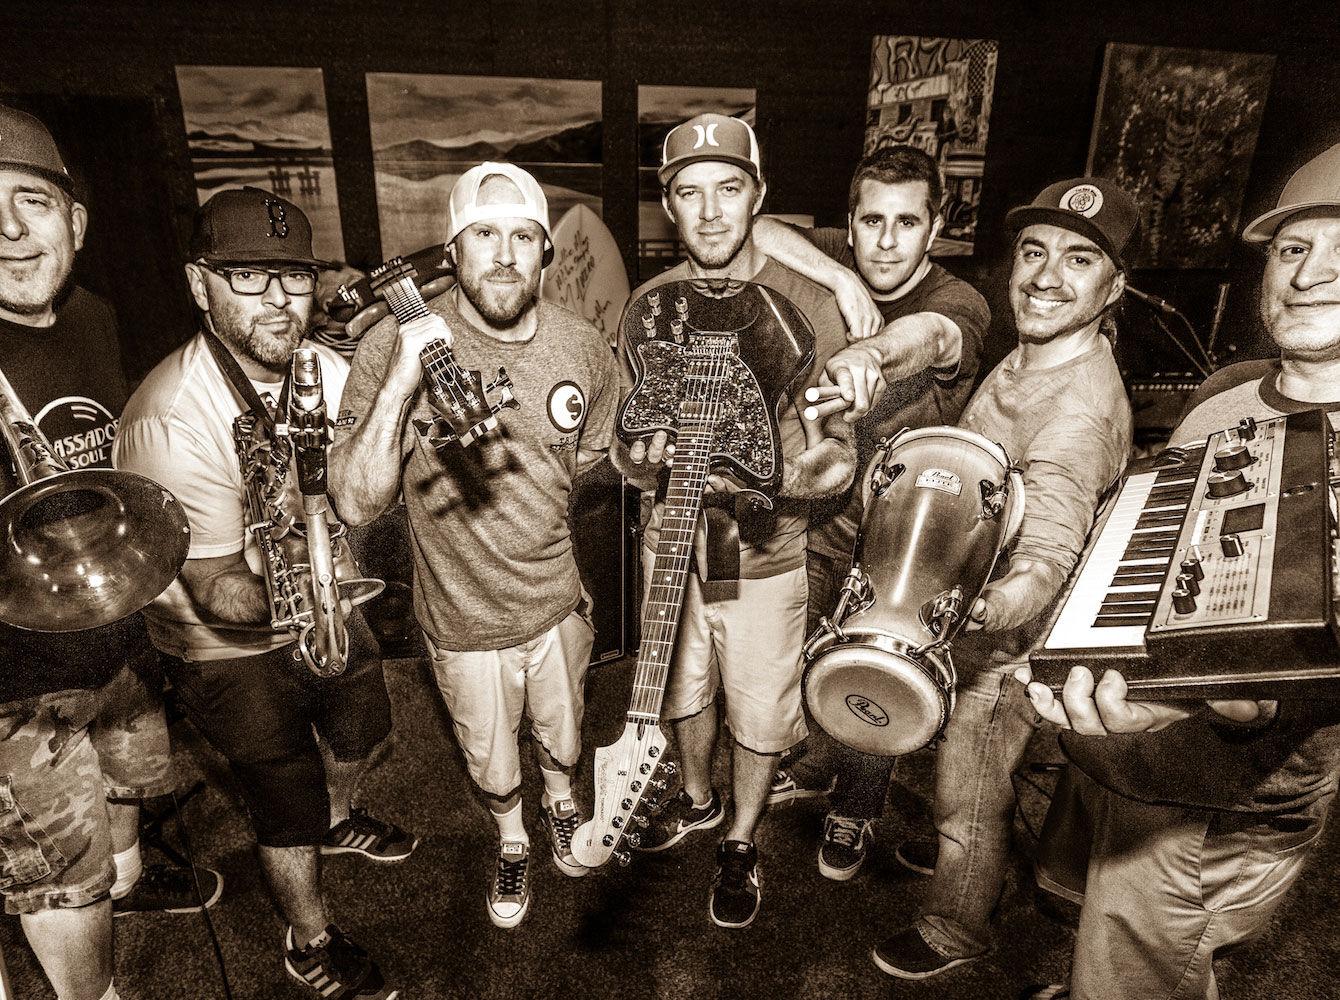 Slightly stoopid with instruments